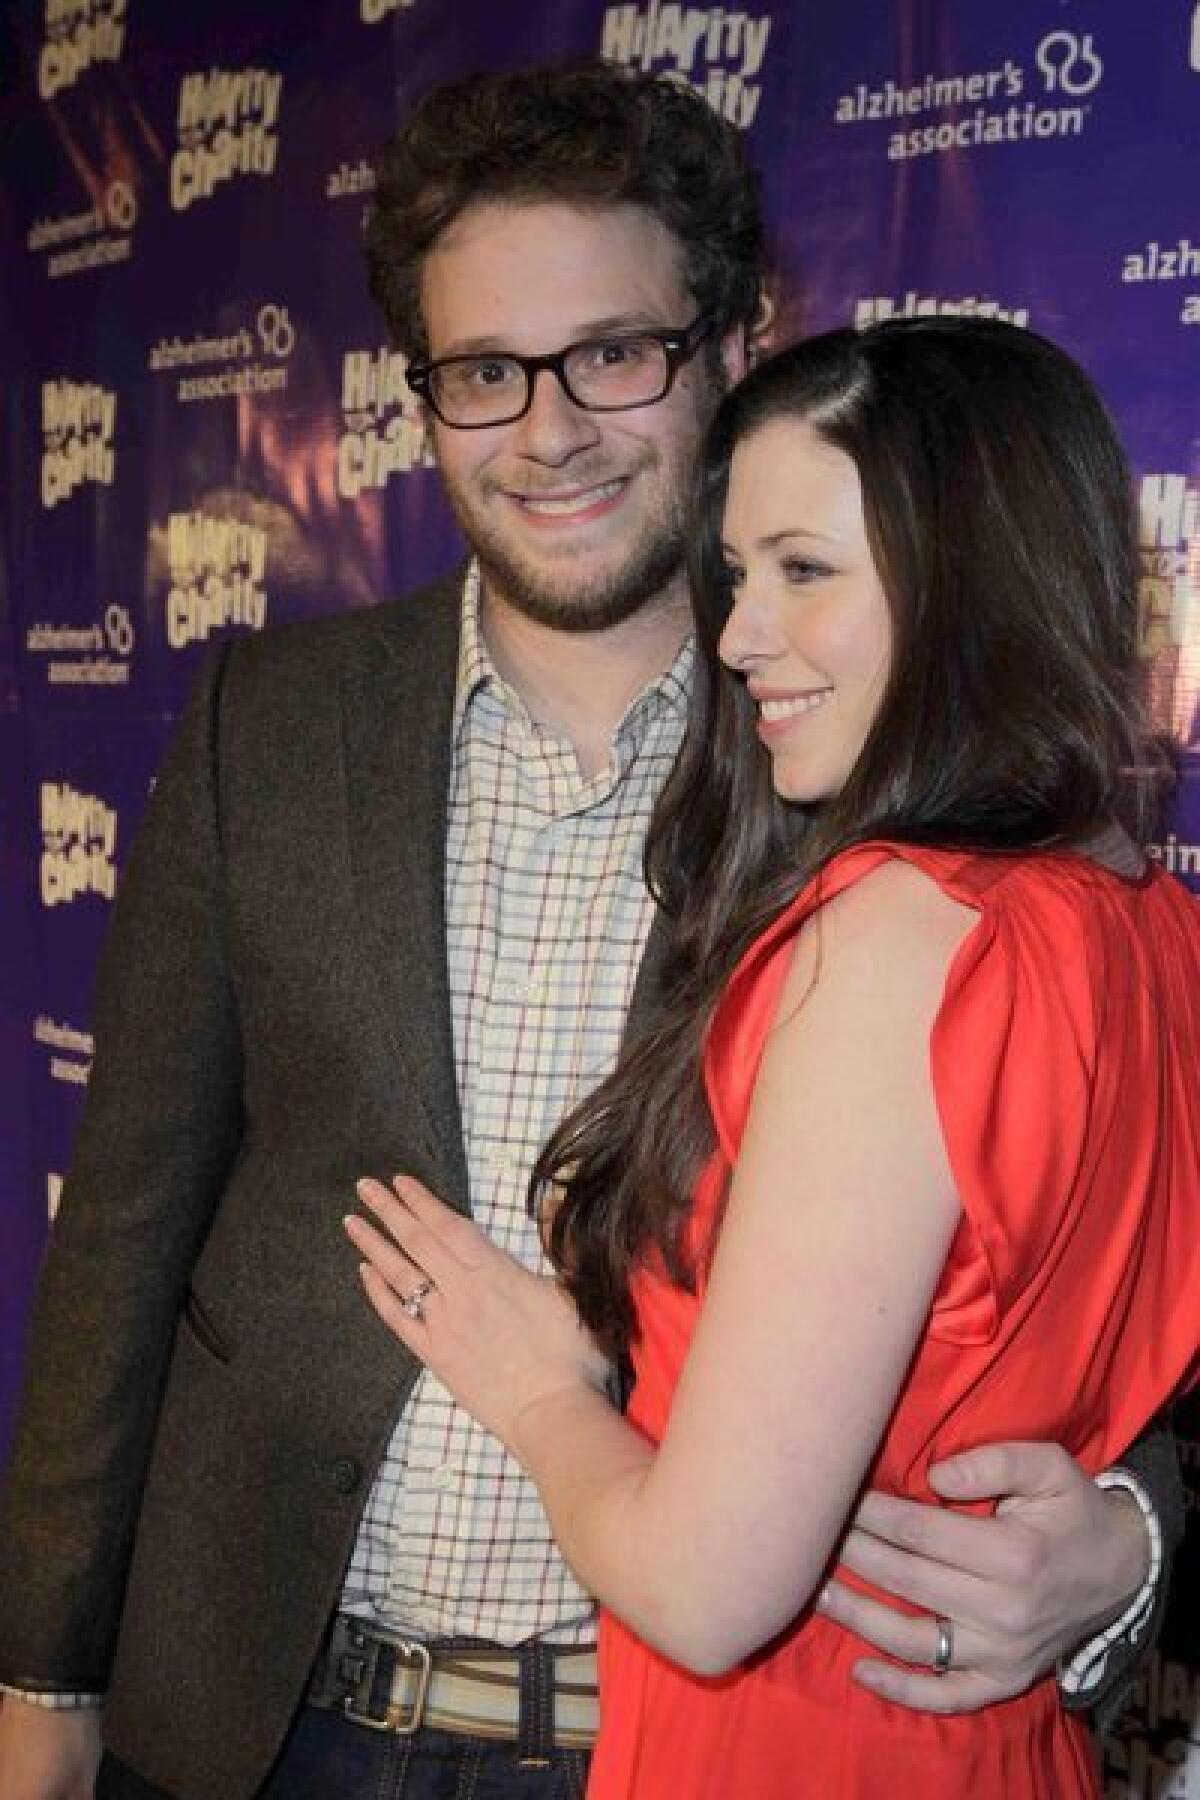 Seth Rogen and Lauren Miller arrive at last year's "Hilarity For Charity" to benefit the Alzheimer's Assn. Rogen is hosting this year's event.